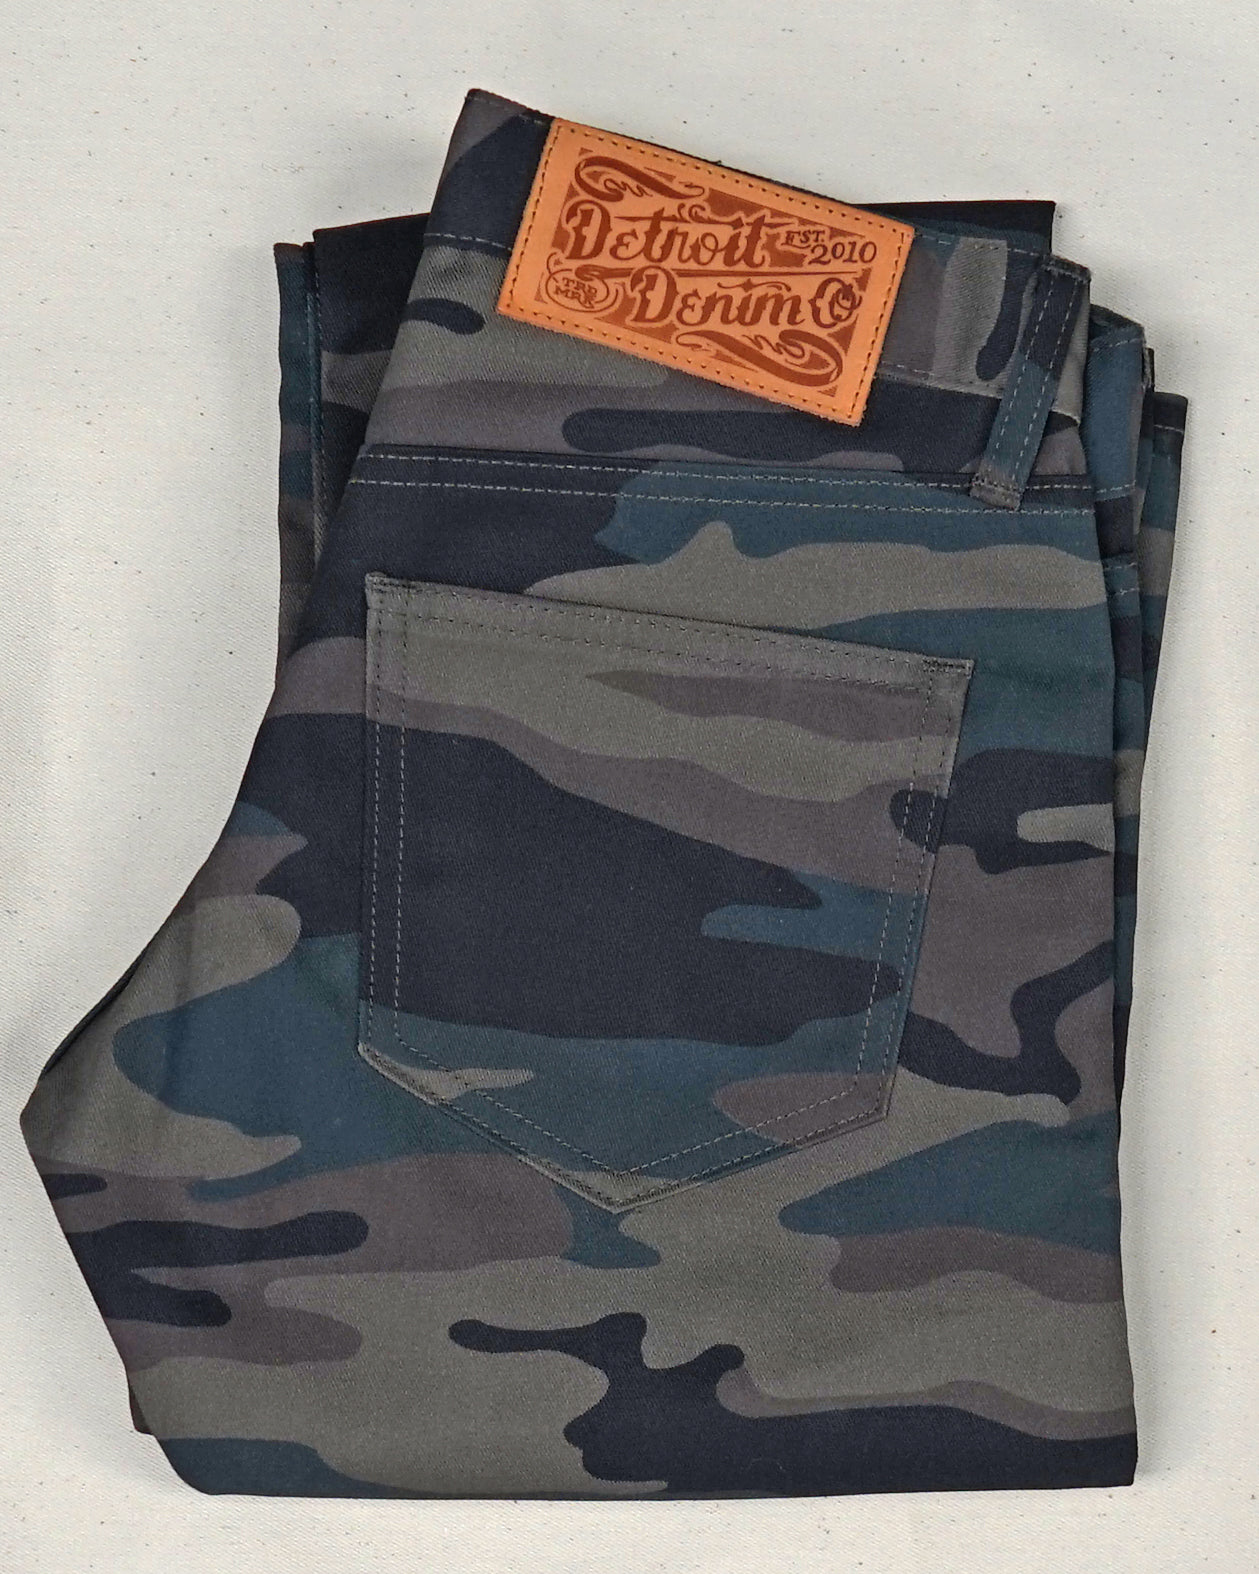 SALE New Kancan DARK Camouflage Denim Jeans Camo Pants Reg Sizes 0/23 1/24  3/25 5/26 7/27 9/28 11/29 Fitted Skinny - Etsy